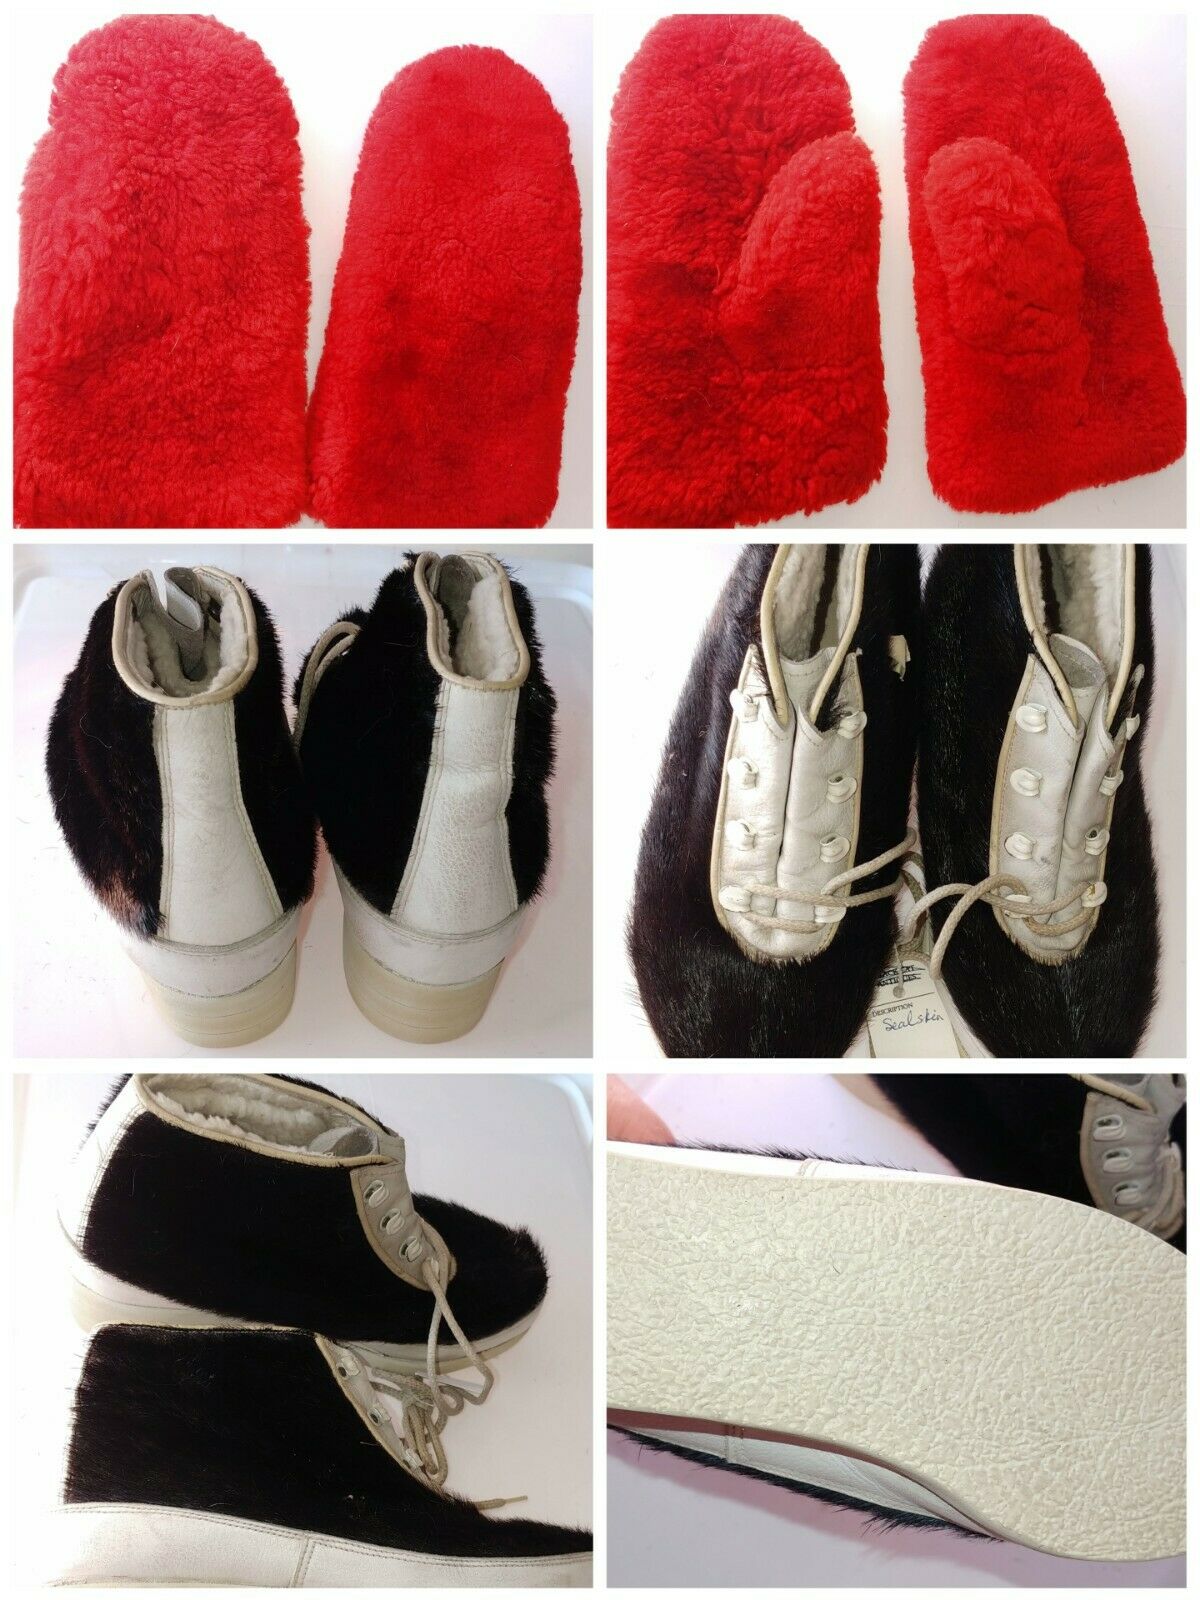 Native Vintage Wool Skin Mittens And Fashion Fur Boots